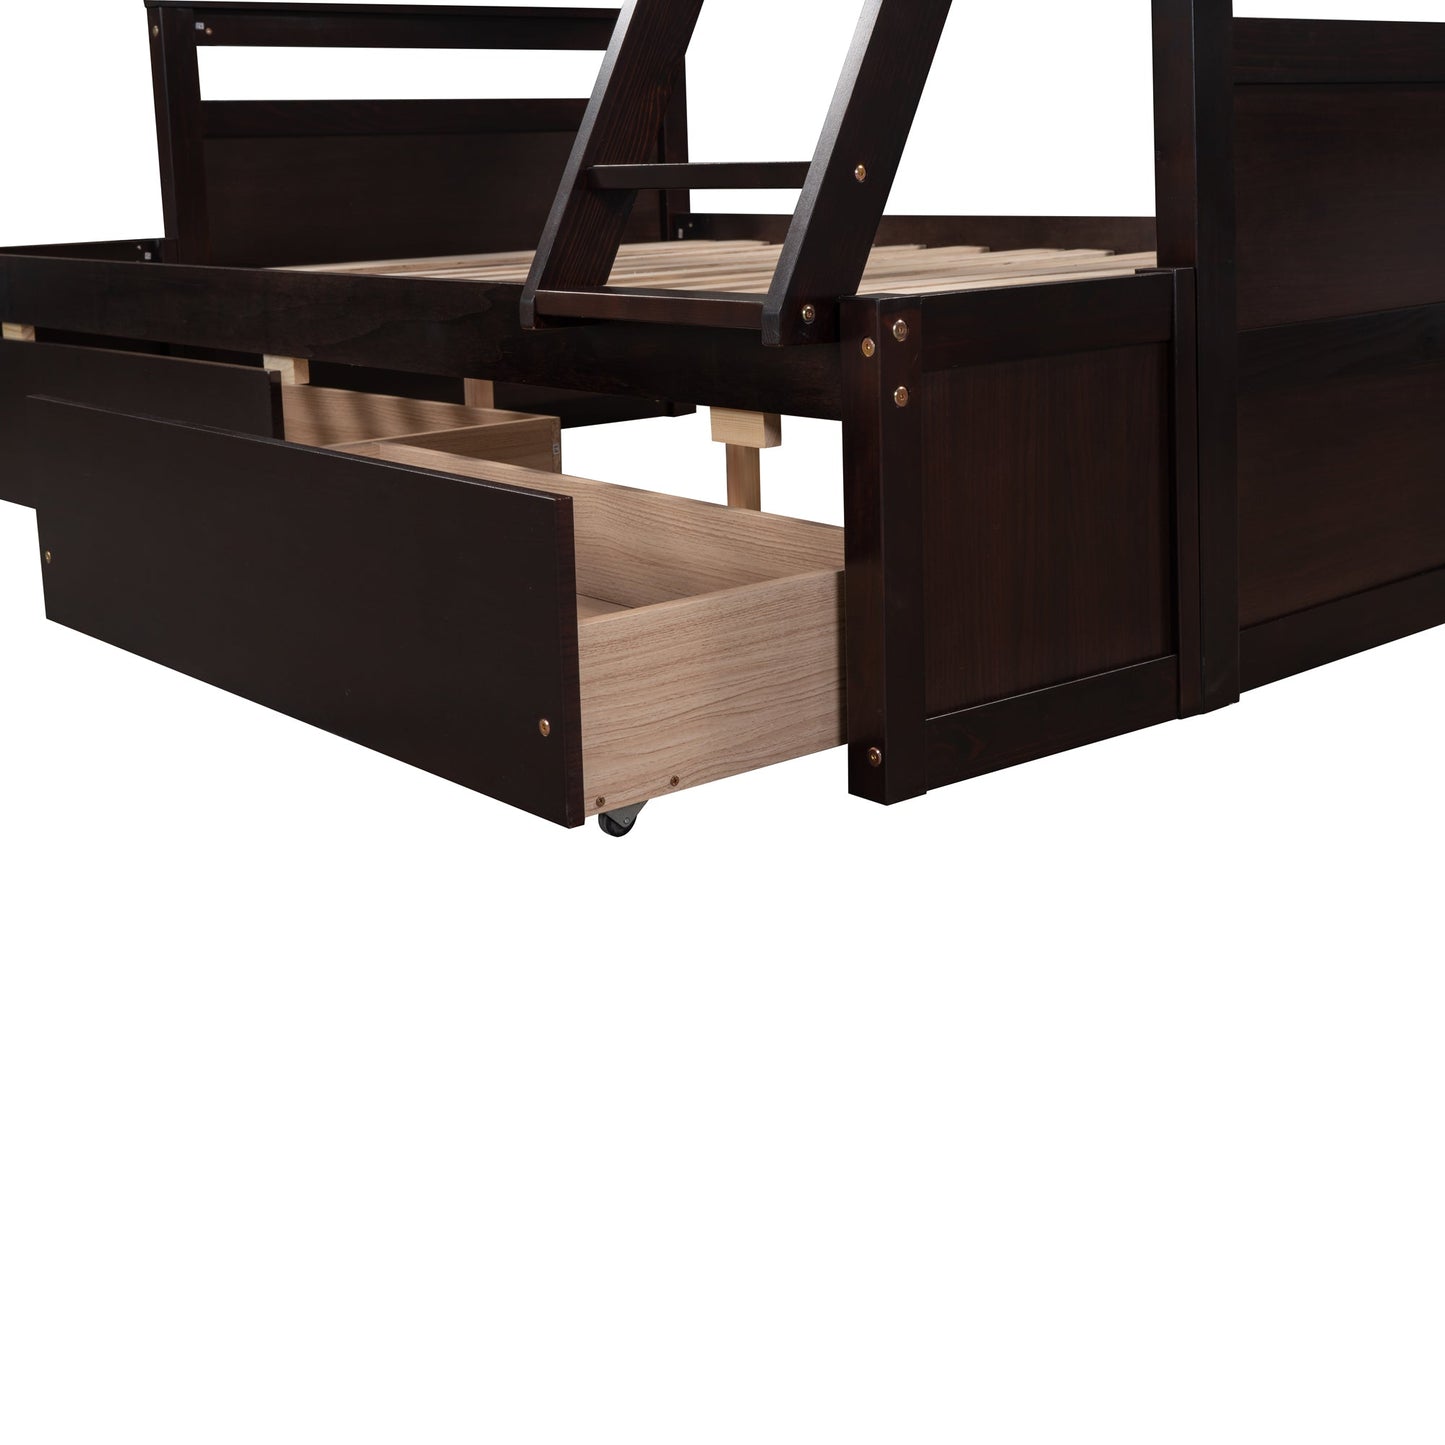 Myrna Twin over Full Bunk Bed with Storage - Espresso